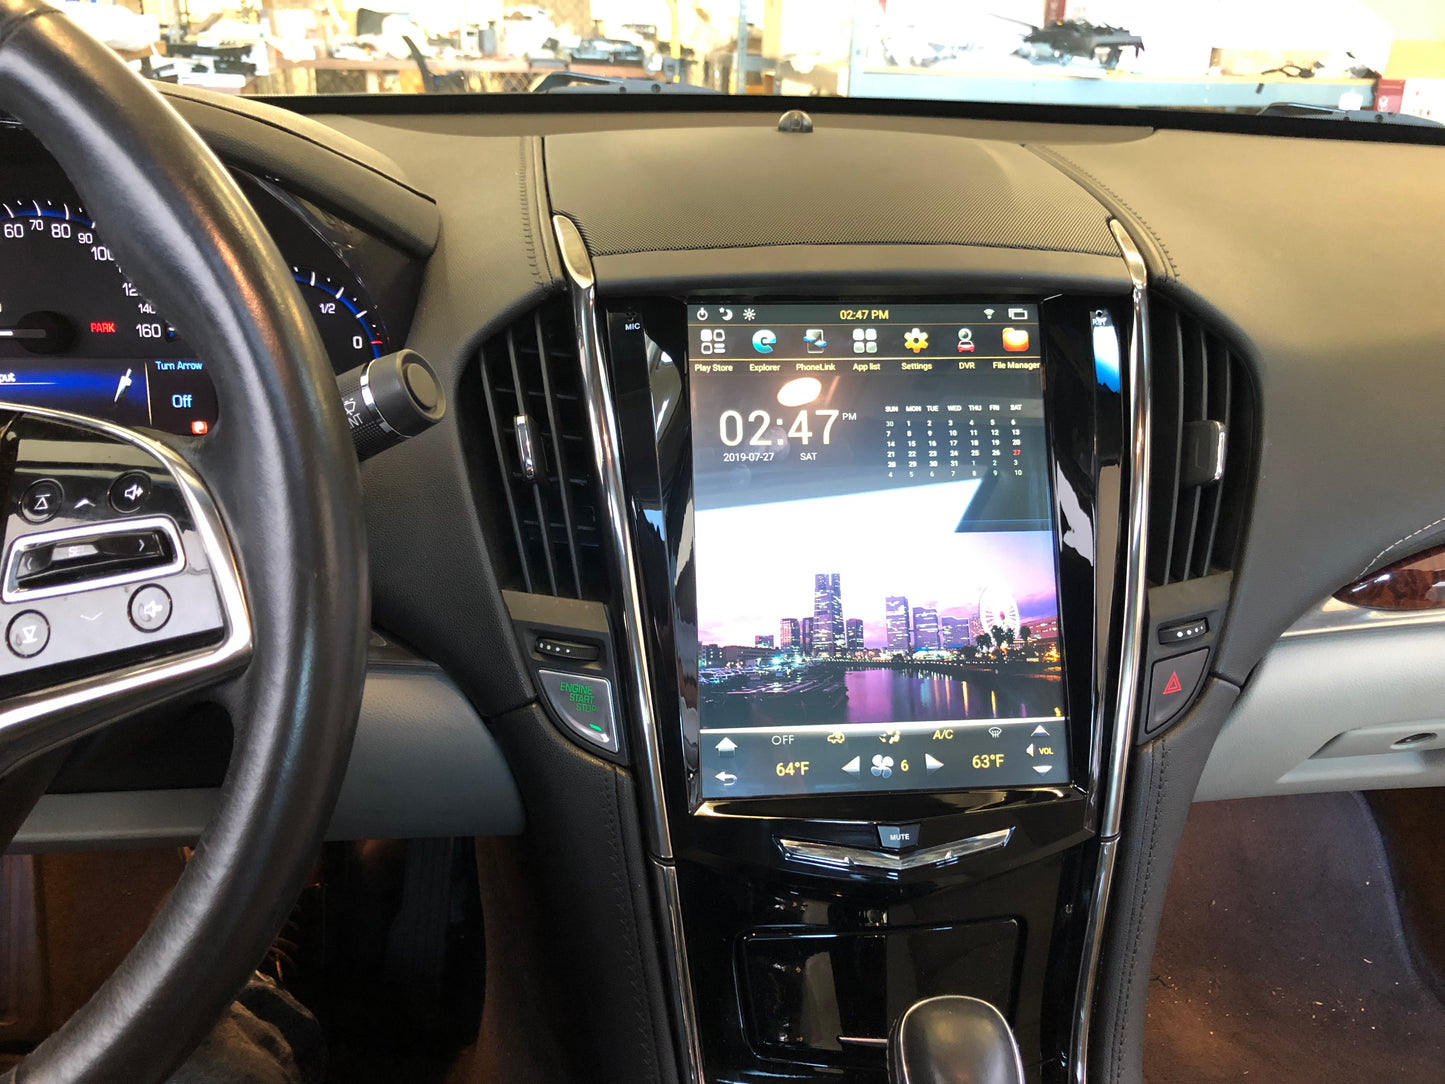 [Open Box][PX6 SIX-CORE]10.4" Android 9 fast boot Vertical Screen Navi Radio for Cadillac ATS CTS XTS SRX Escalade 2014 - 2019